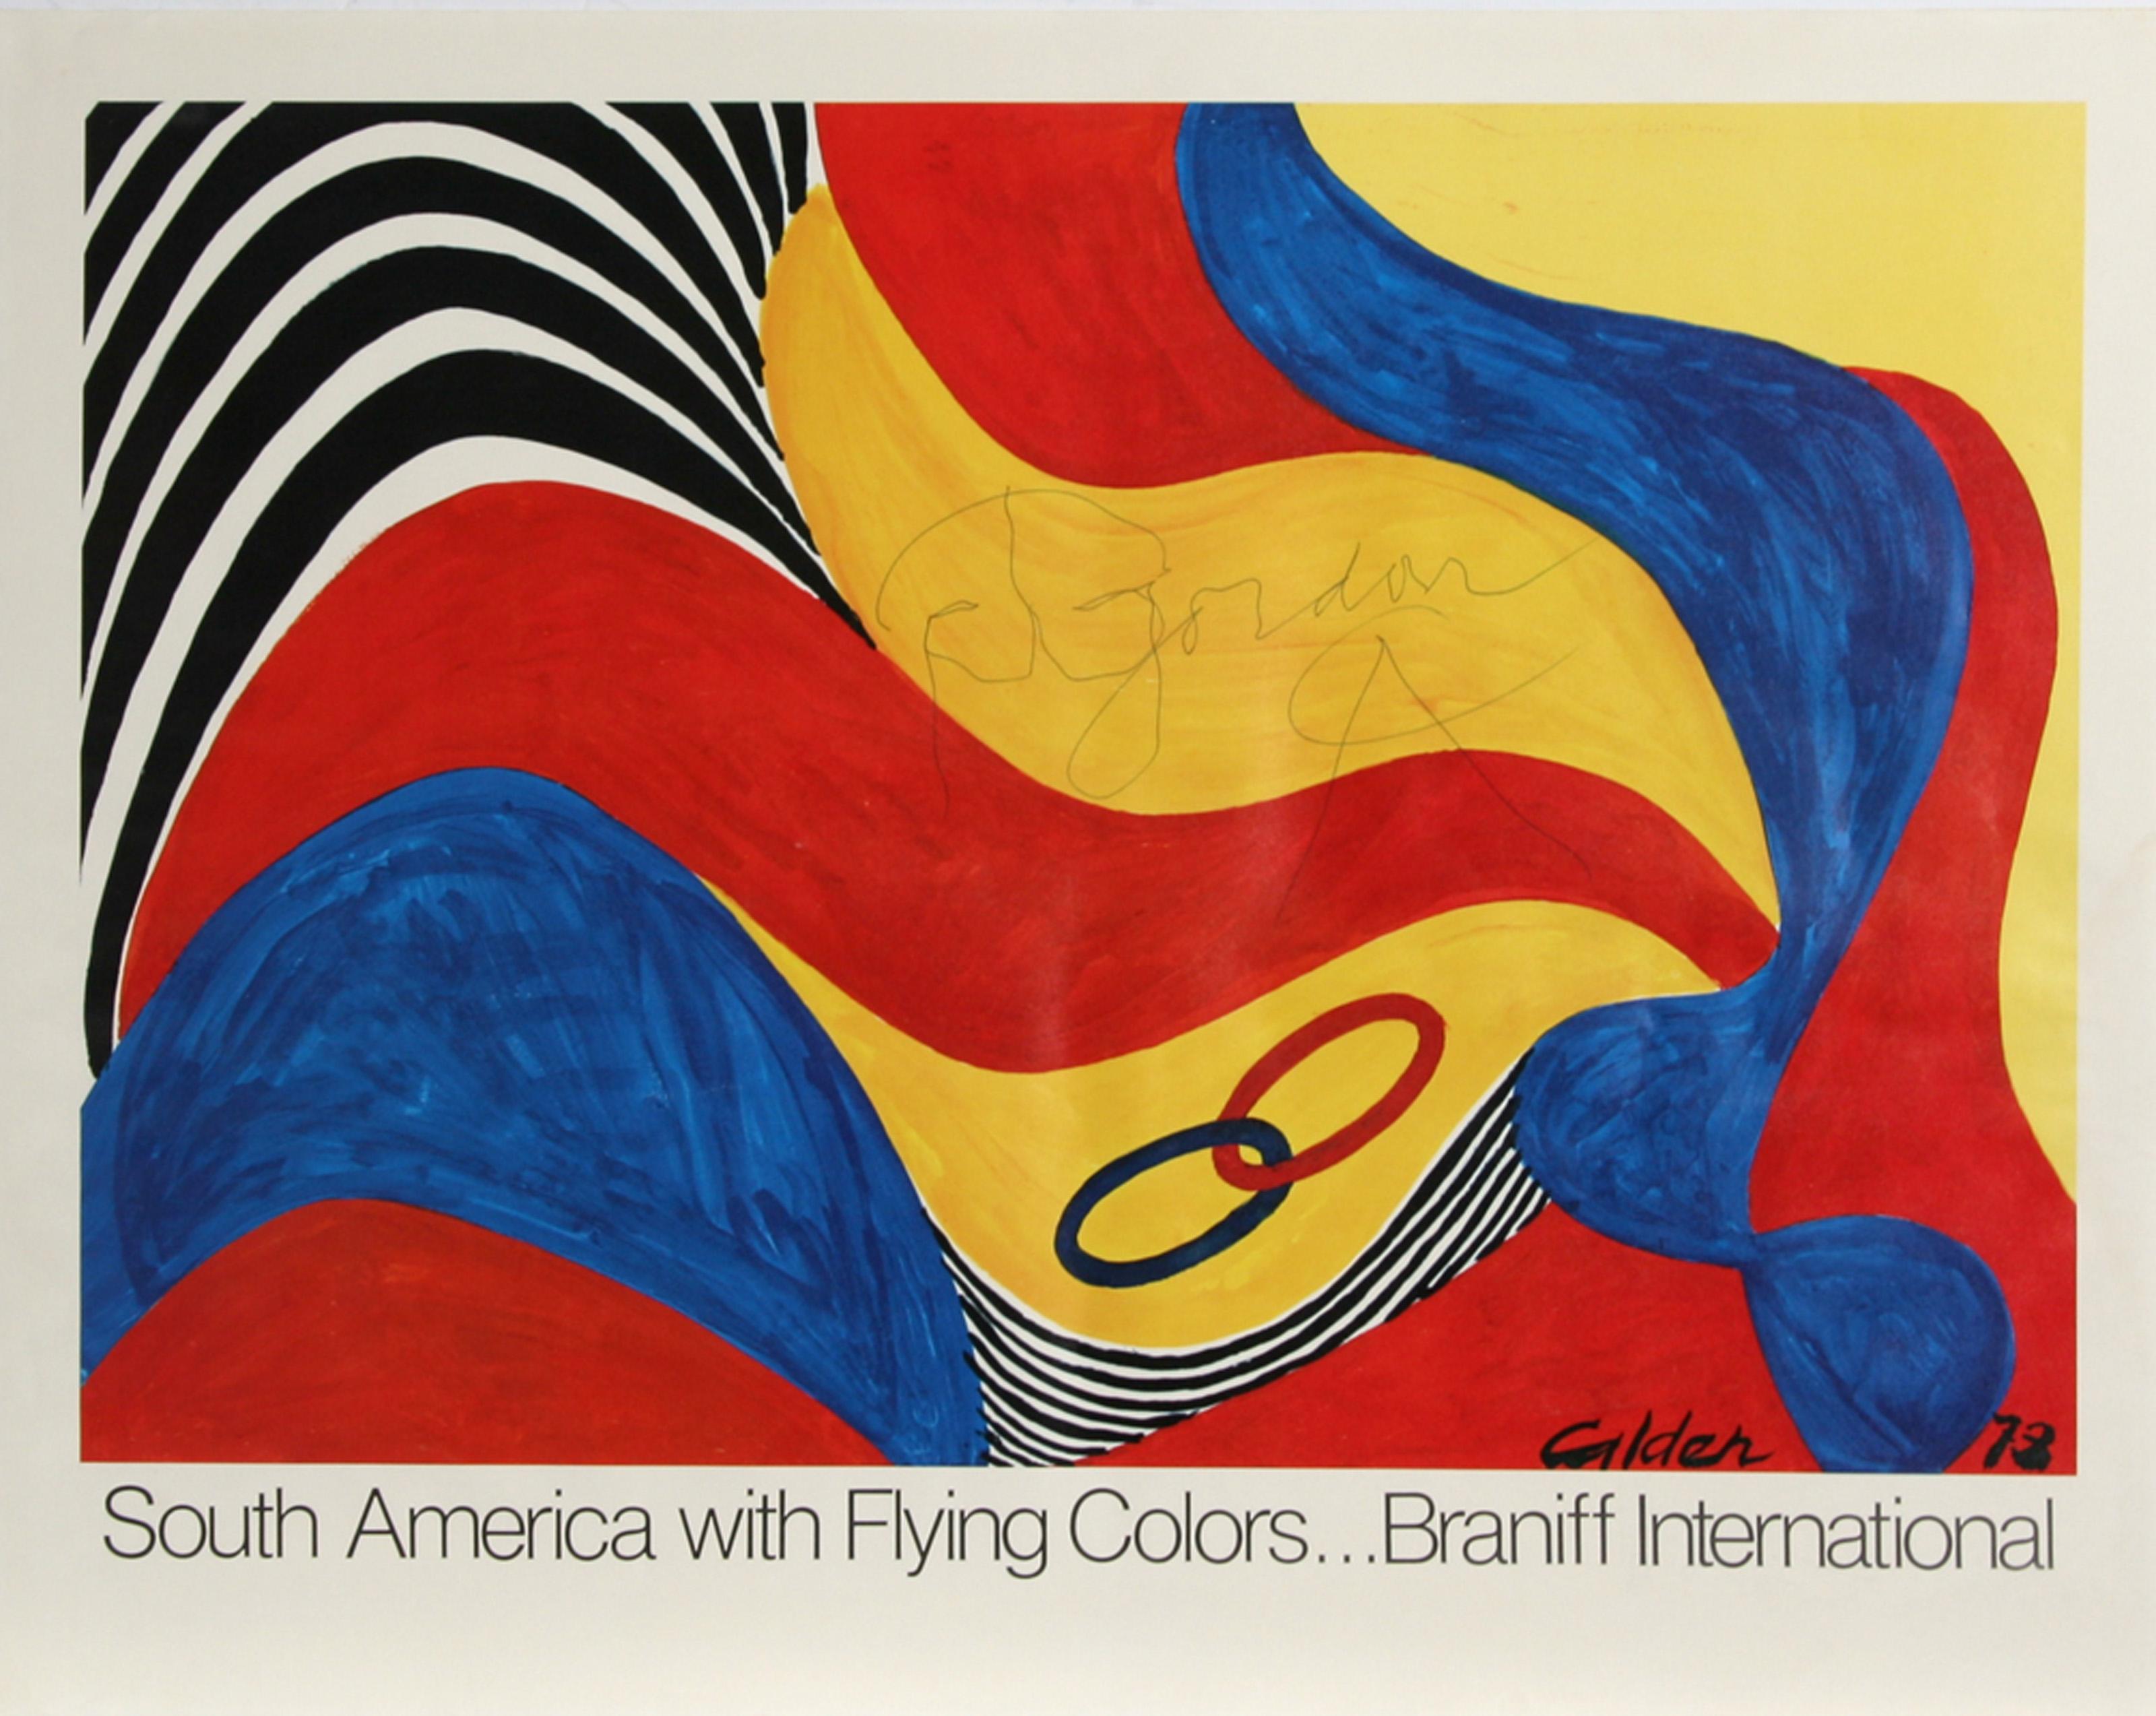 Alexander Calder, American (1898 - 1976) -  South America with Flying Colors. Year: 1973, Medium: Poster, signed, Size: 19 in. x 24 in. (48.26 cm x 60.96 cm) 